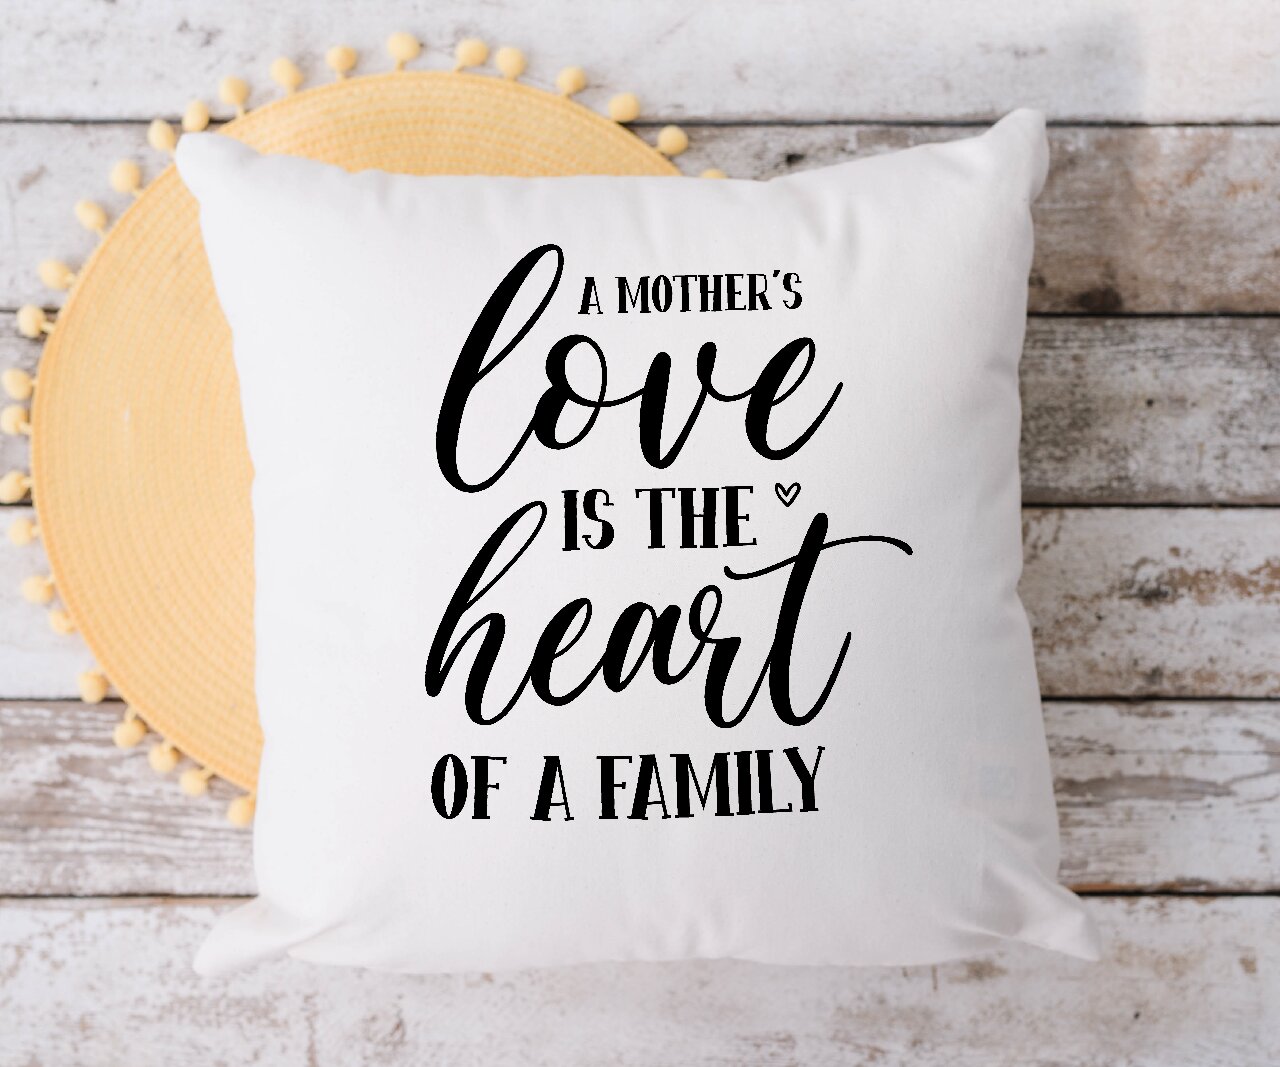 A Mother's Love Is The Heart Of The Family  - Cushion Cover